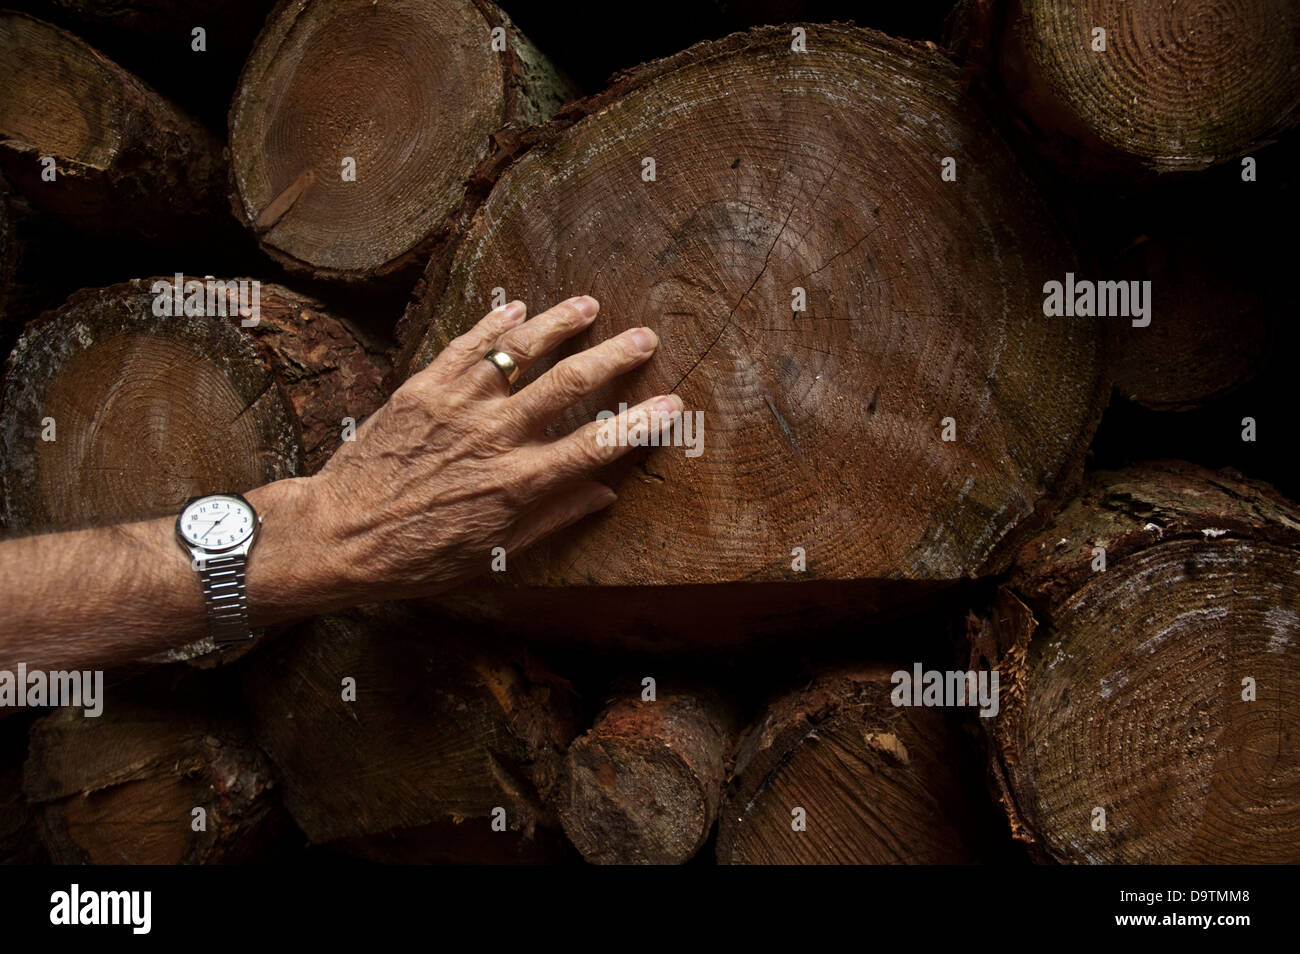 Man's hand touching end of a sawn log. Stock Photo